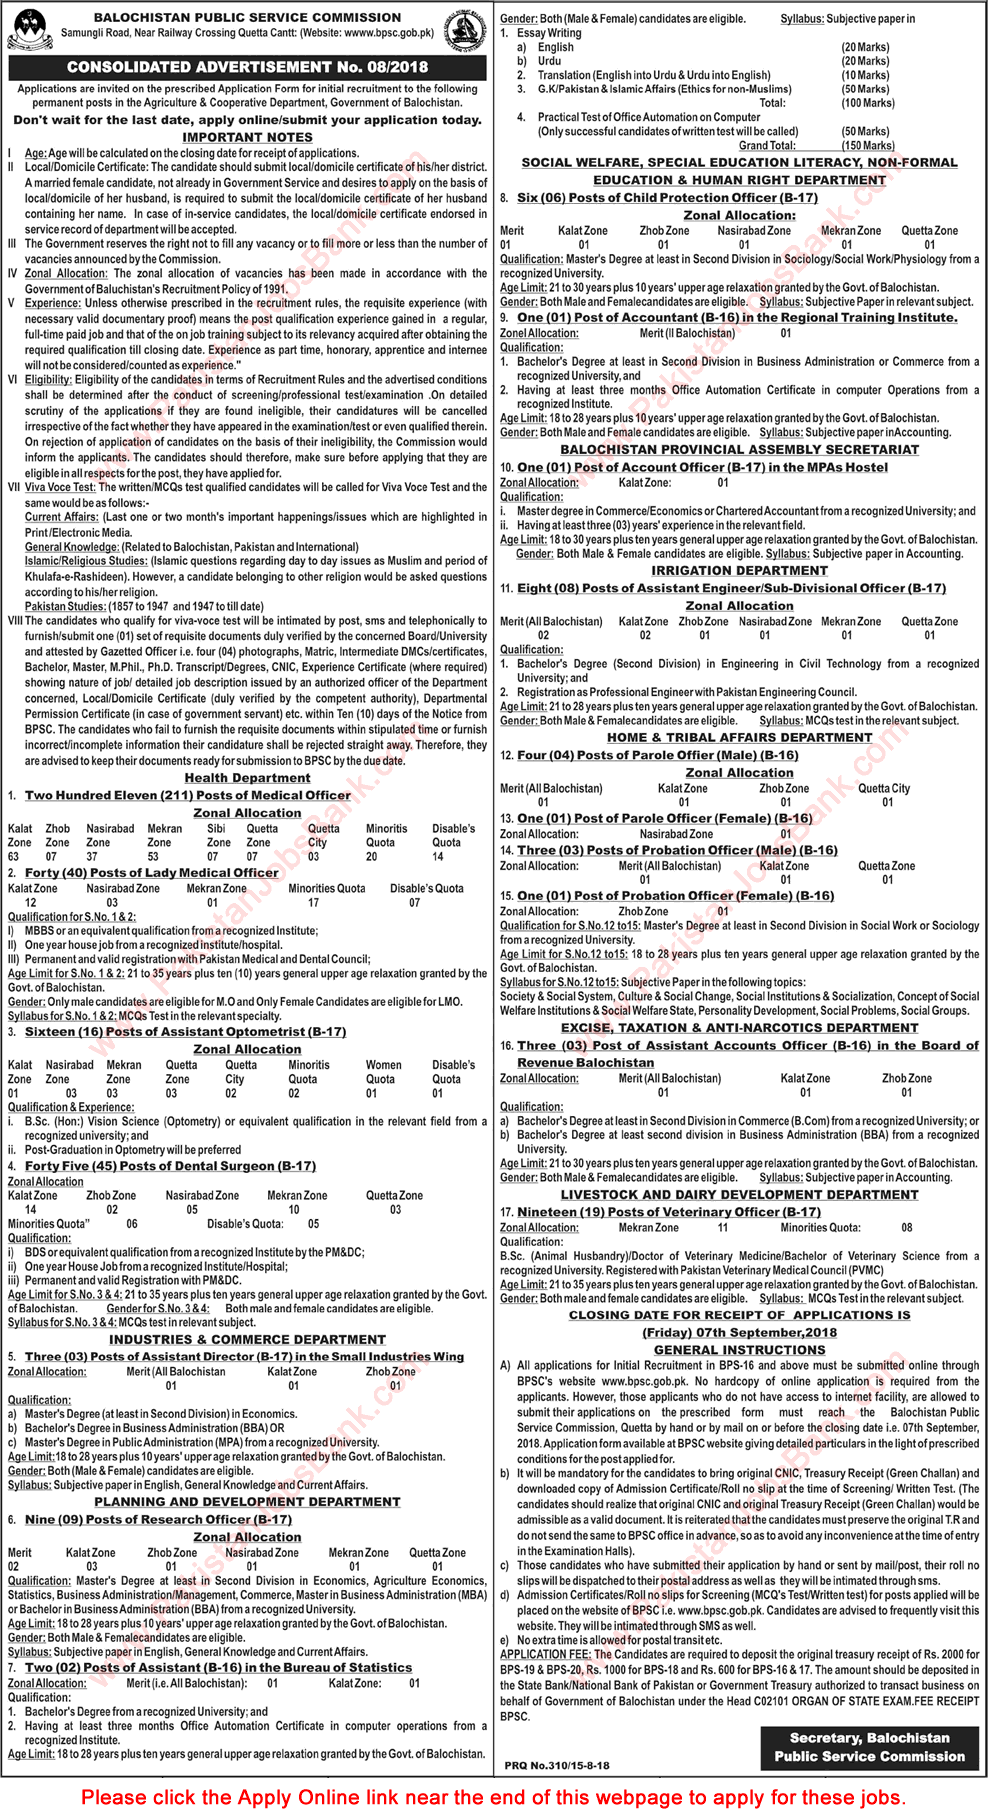 BPSC Jobs August 2018 Apply Online Consolidated Advertisement No 08/2018 8/2018 Latest